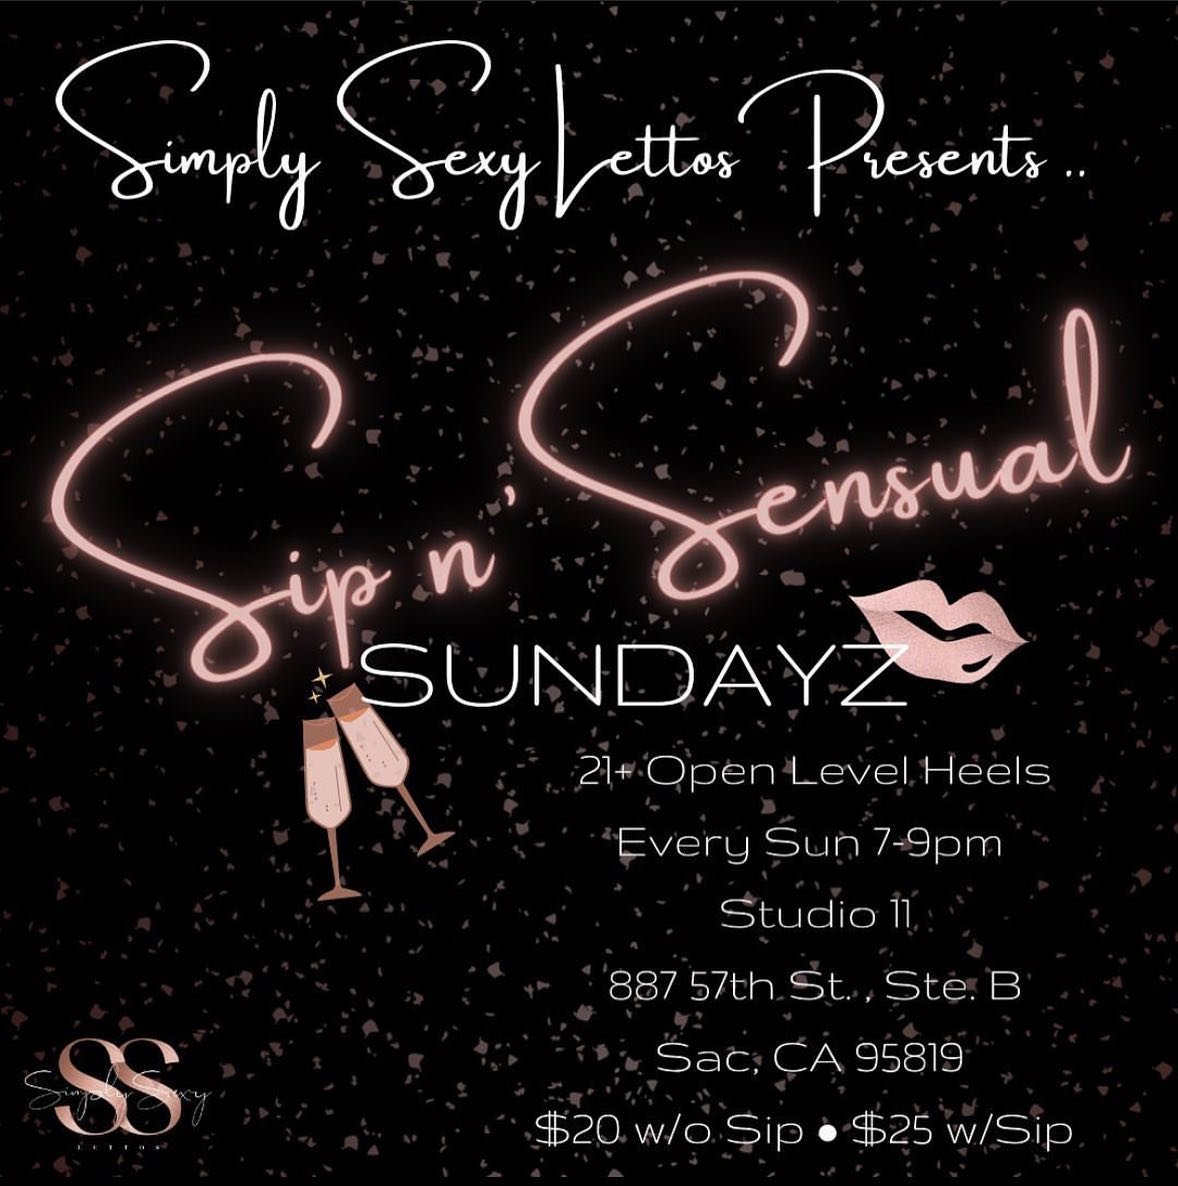 @simplysexylettos is bringing Sip n&rsquo; Sensual Heels classes to @studio11sacramento every Sunday night from 7-9 pm!

Ages 21+
$25 with 🥂 
$20 without

Payments accepted :
CashApp-$simplysexylettos1
Venmo- simplysexylettos
For CASH / ZELLE / Appl